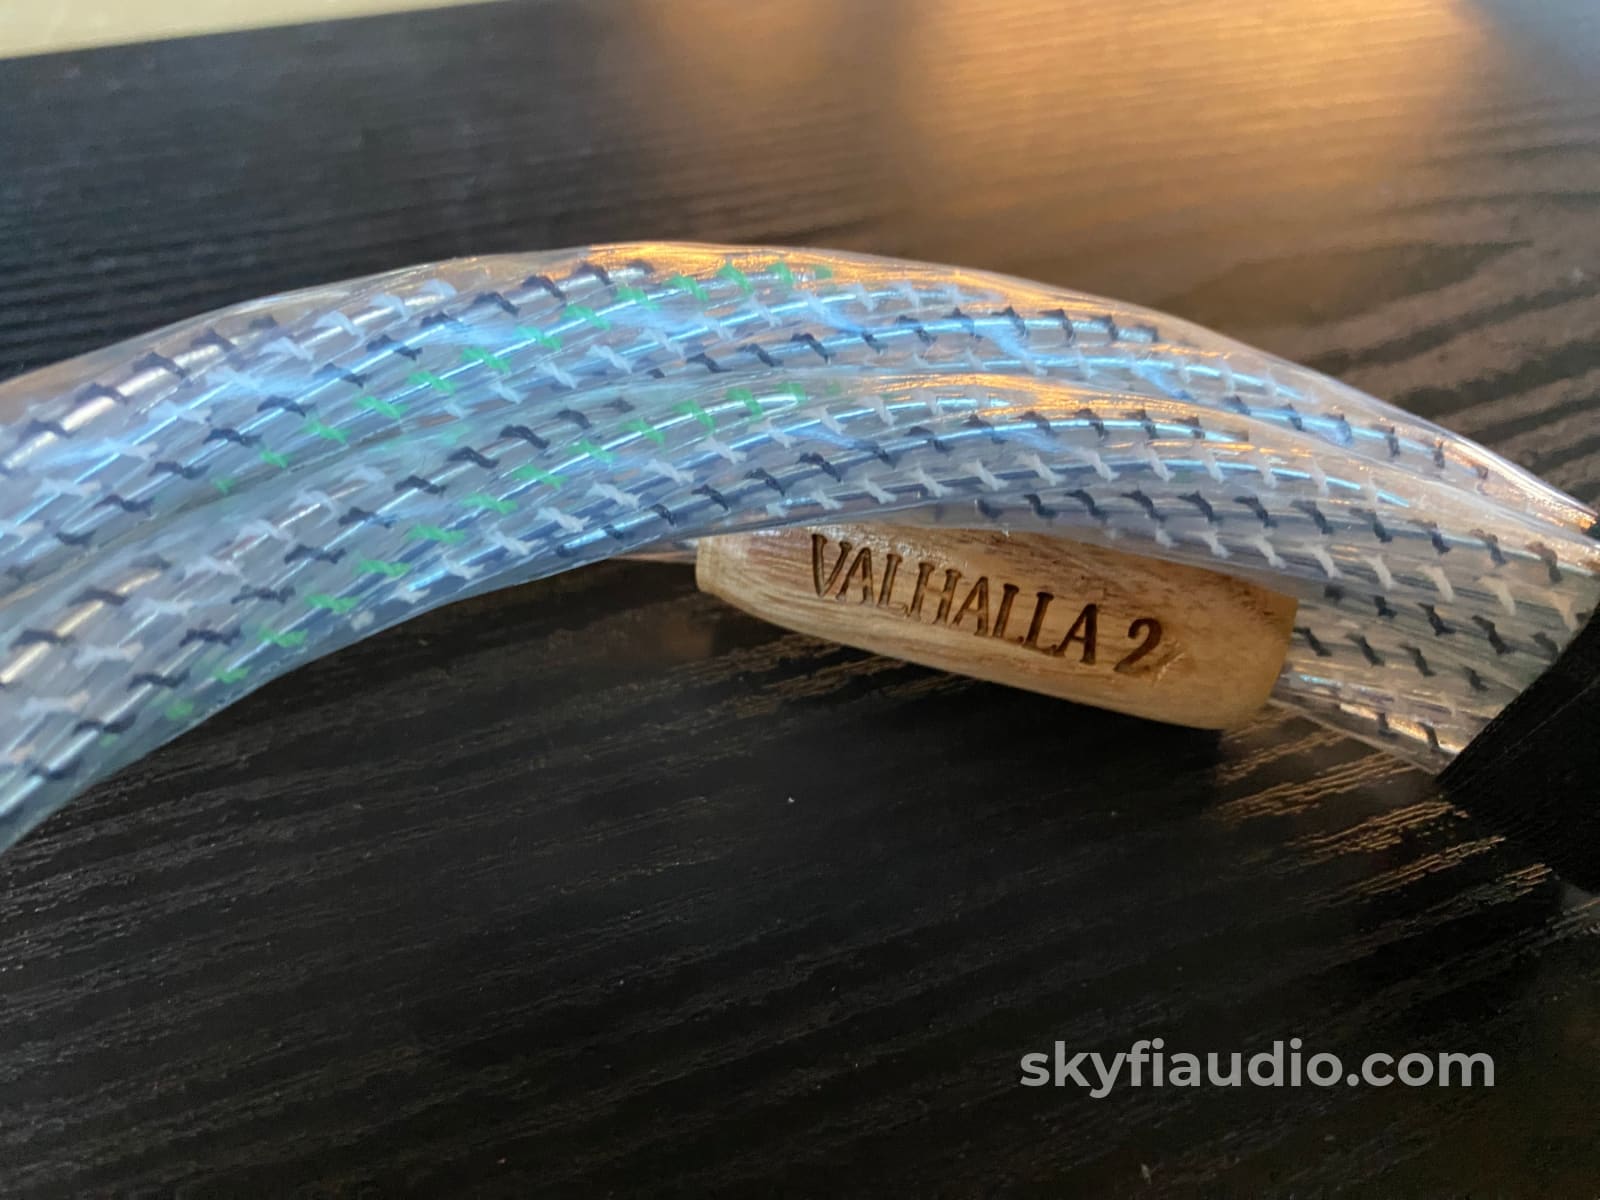 Nordost Valhalla 2 - Power Cord 1.5M Cables